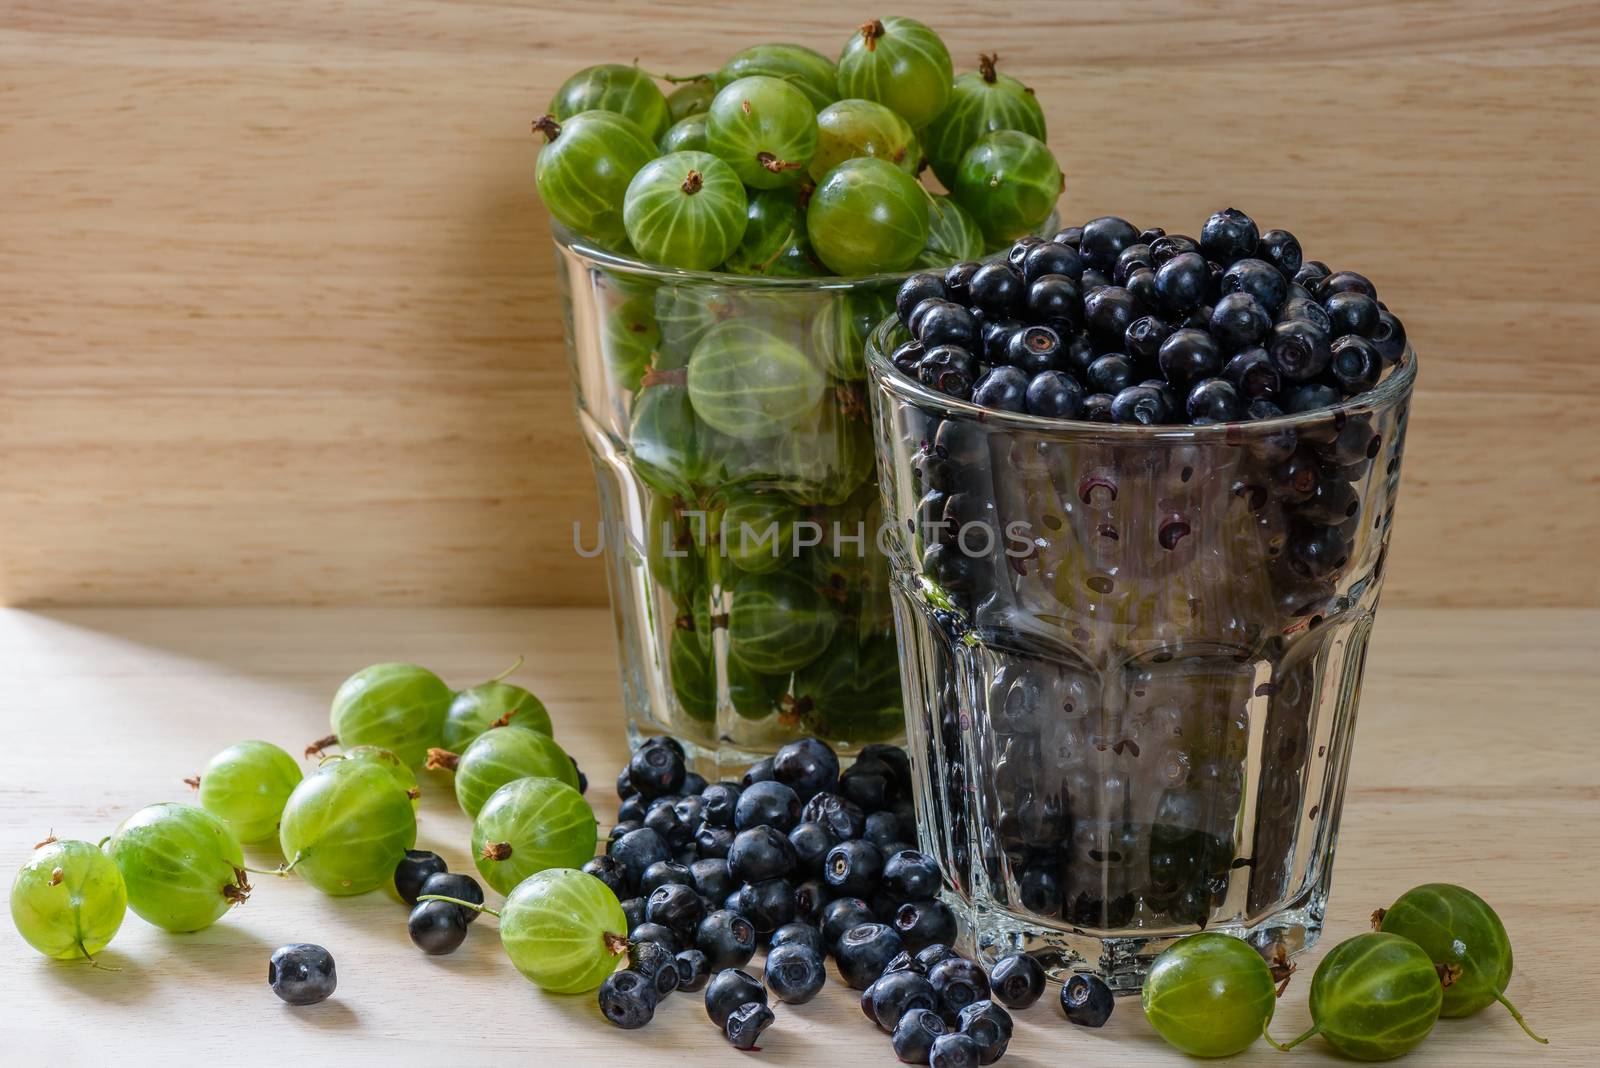 Blueberries and gooseberries in glass with scattered berries. by Seva_blsv